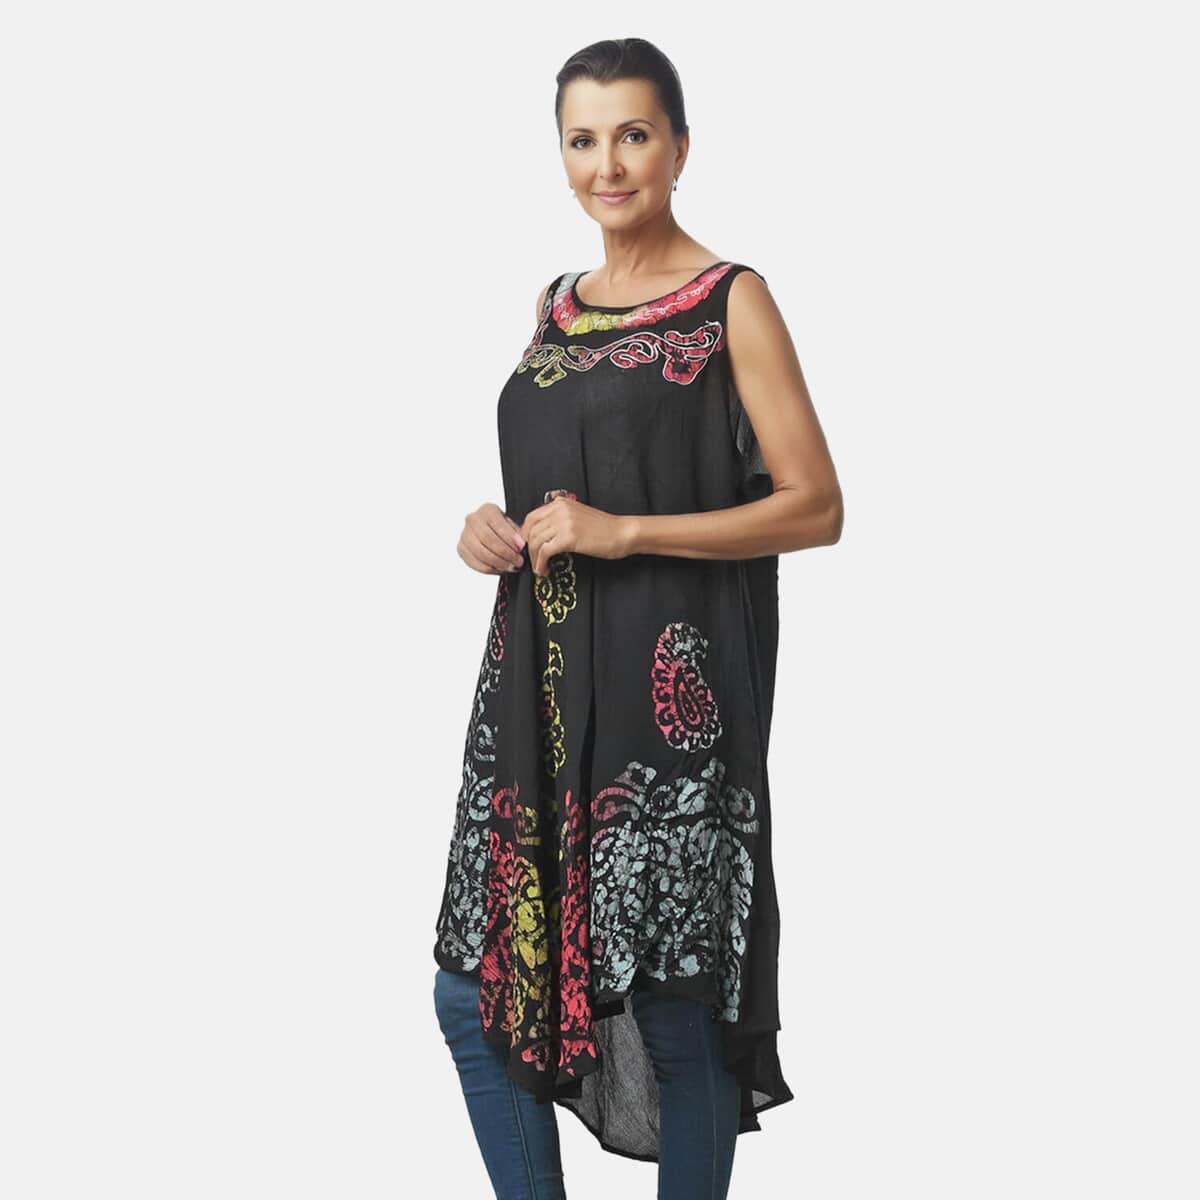 Tamsy Rainbow and Black Butterfly Print Umbrella Dress - One Size Fits Most (48"x44") image number 3